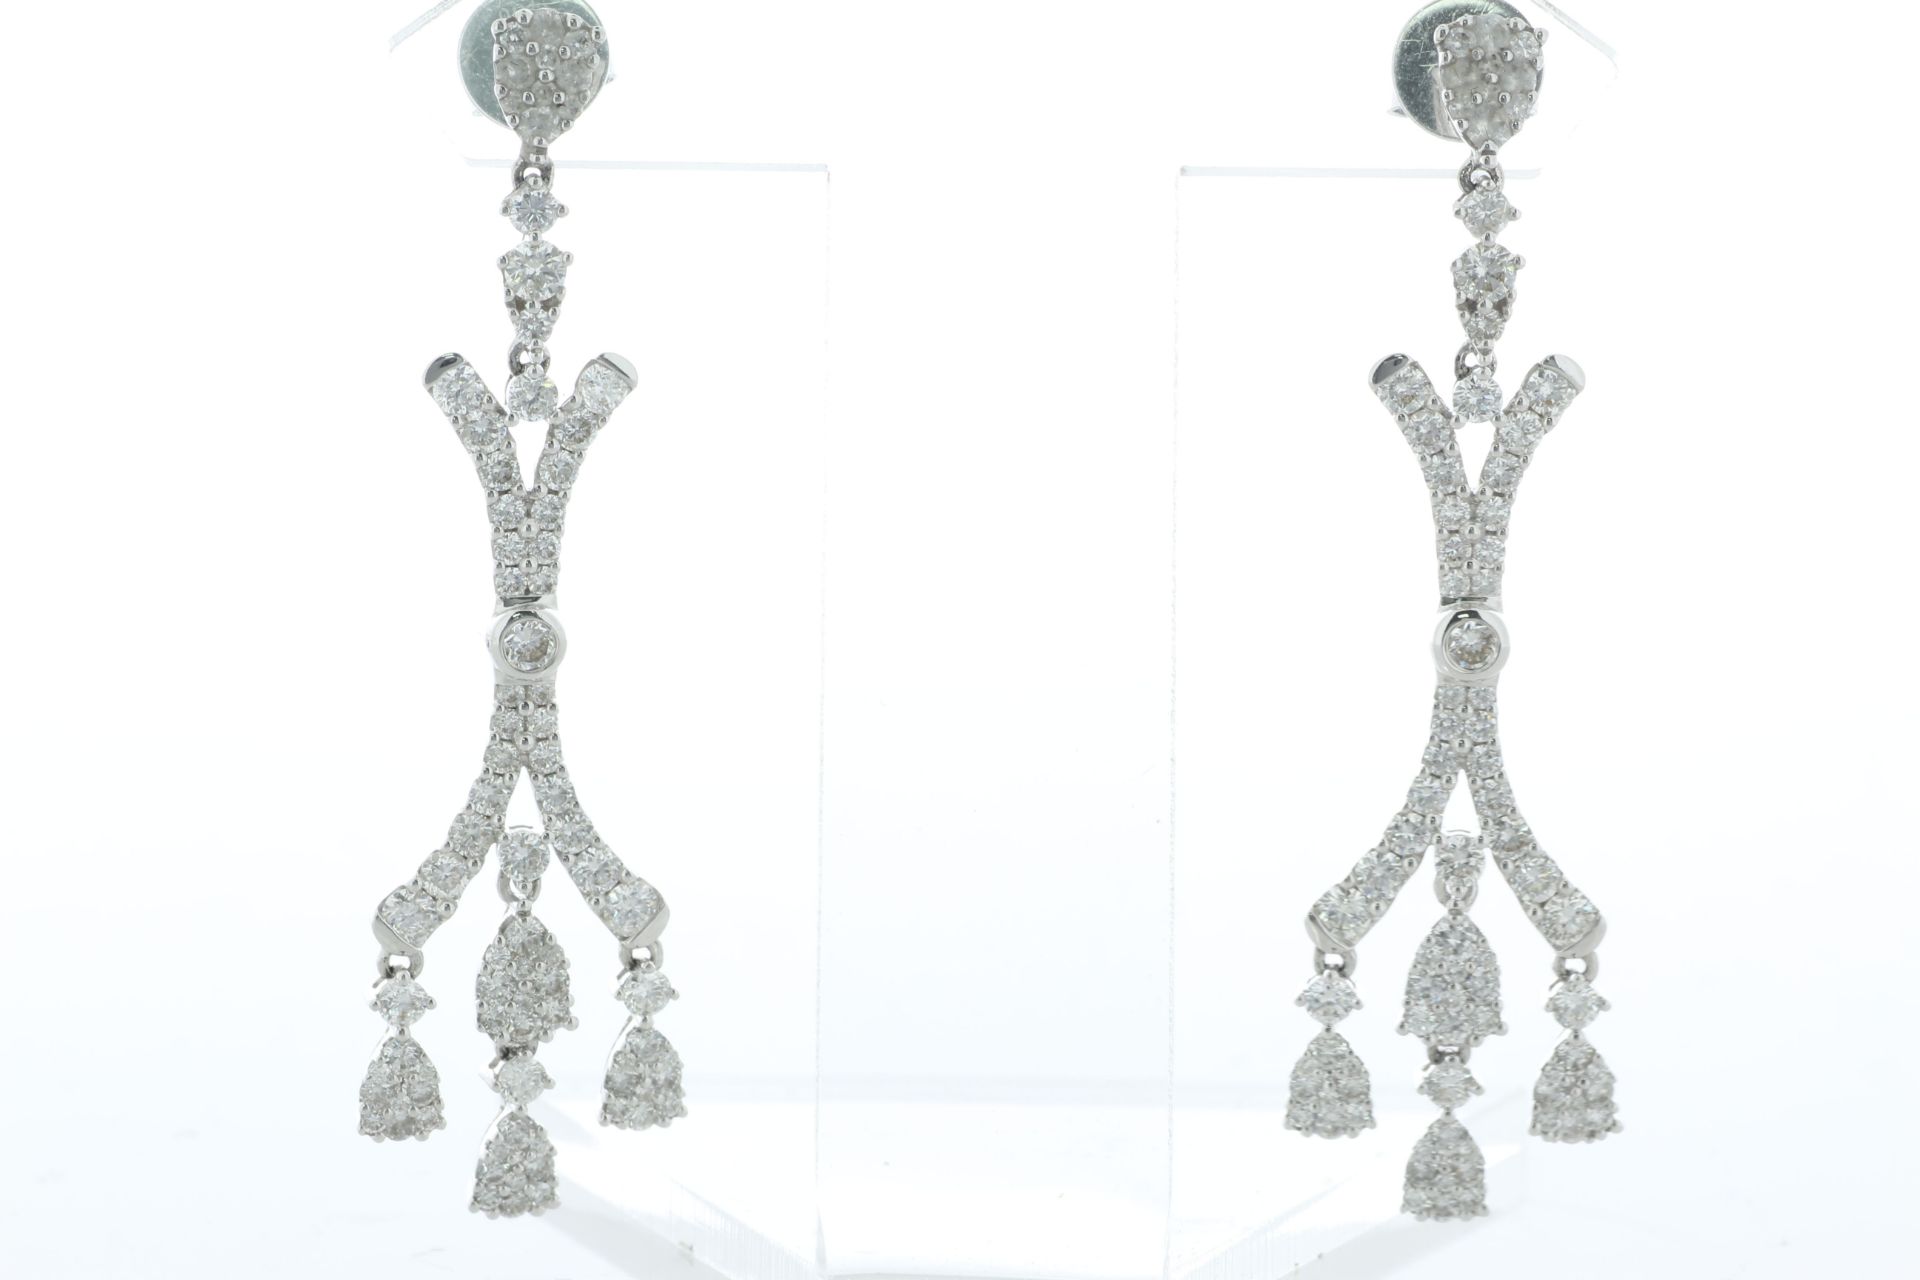 18ct White Gold Cluster Diamond Earring 3.13 Carats - Valued By IDI £20,615.00 - Eighty round